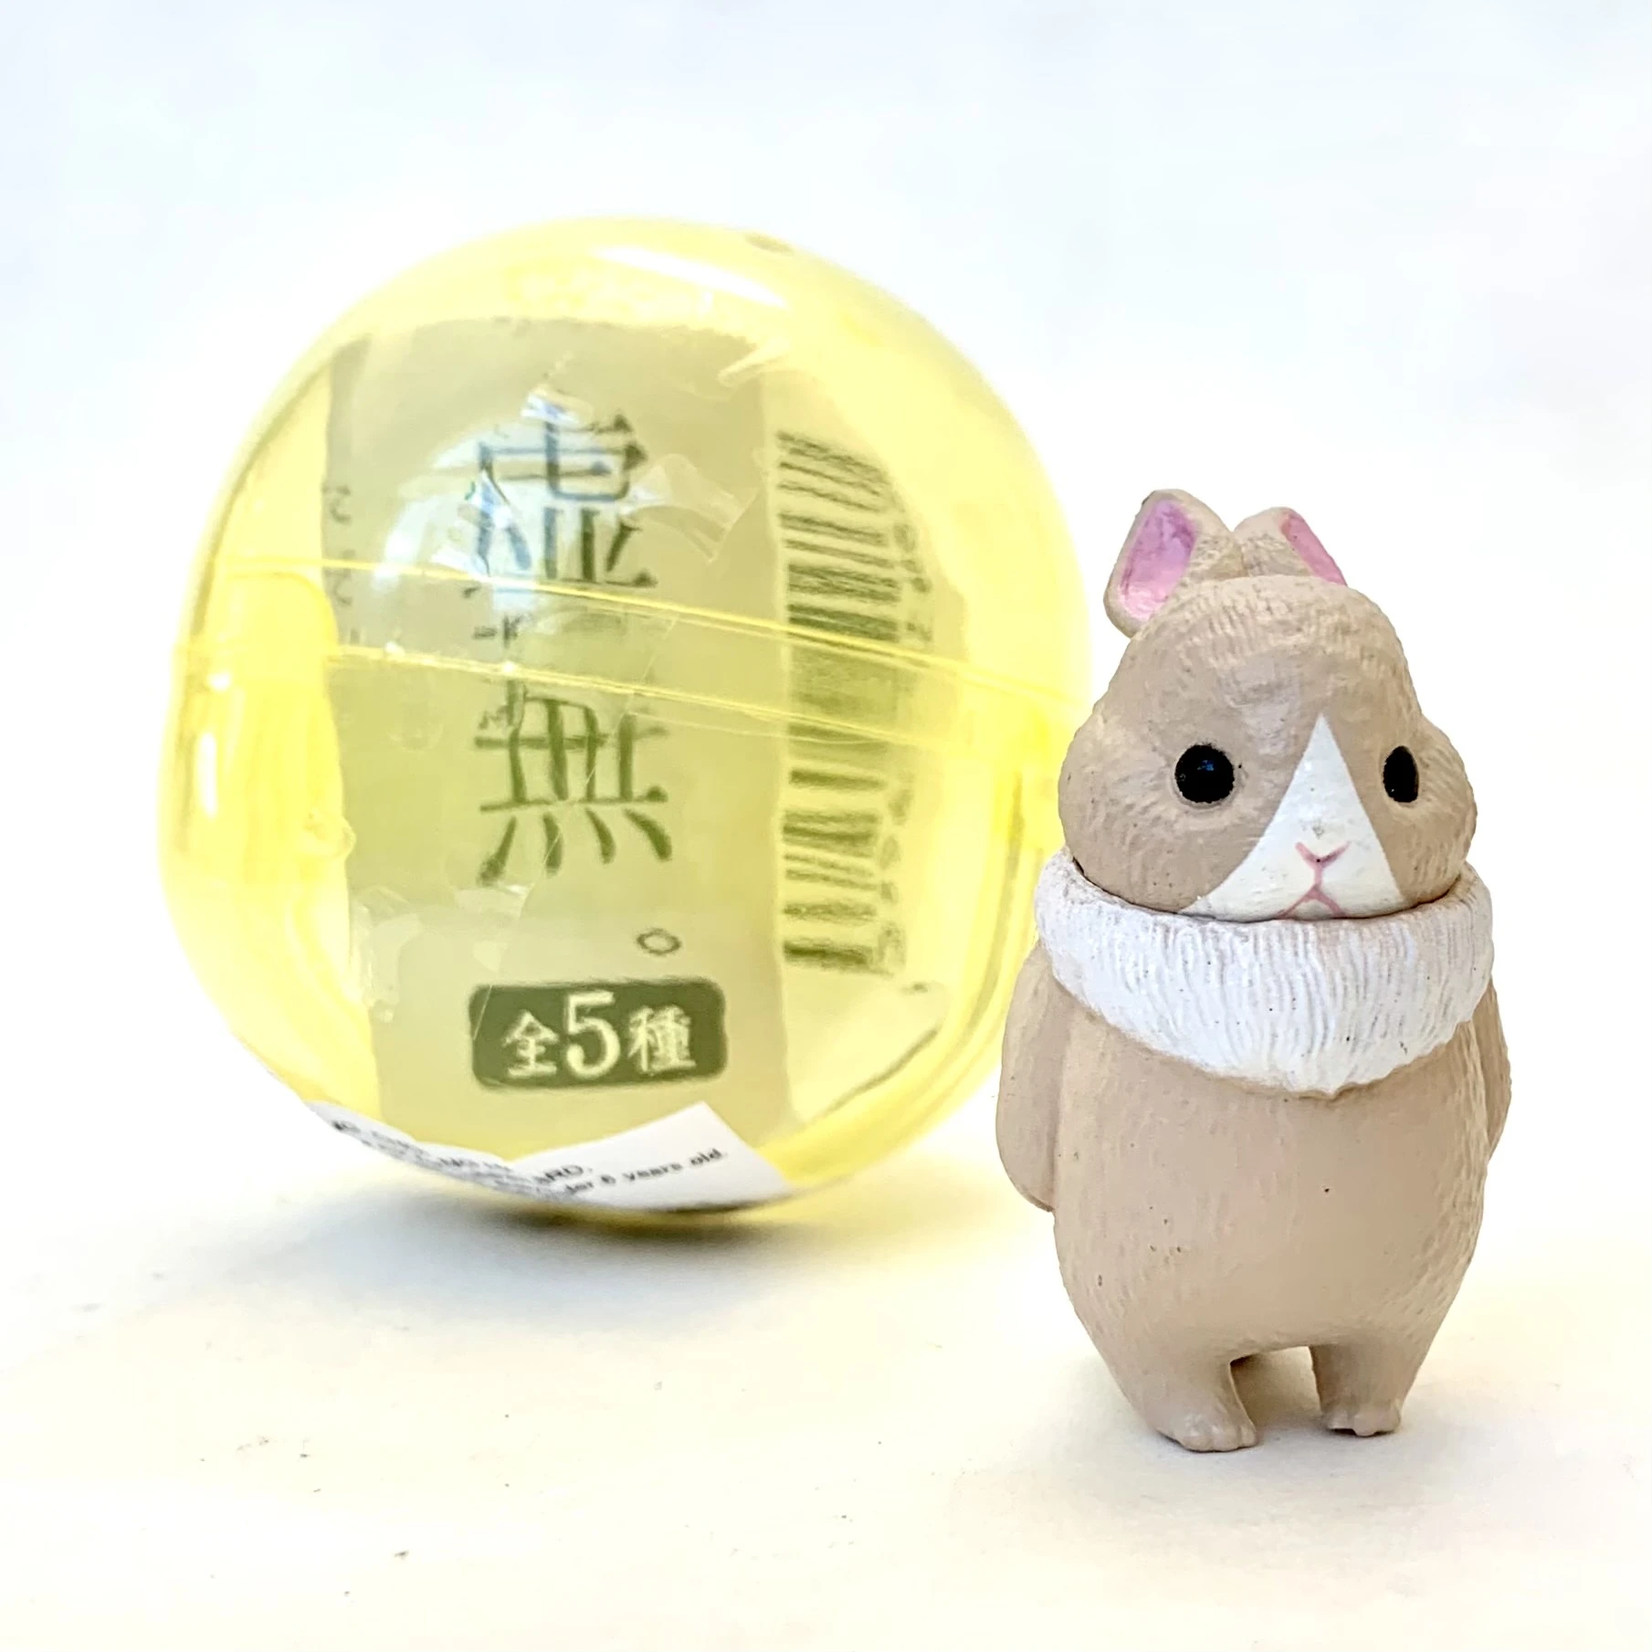 YELL Void Aminals in Capsule - 70909